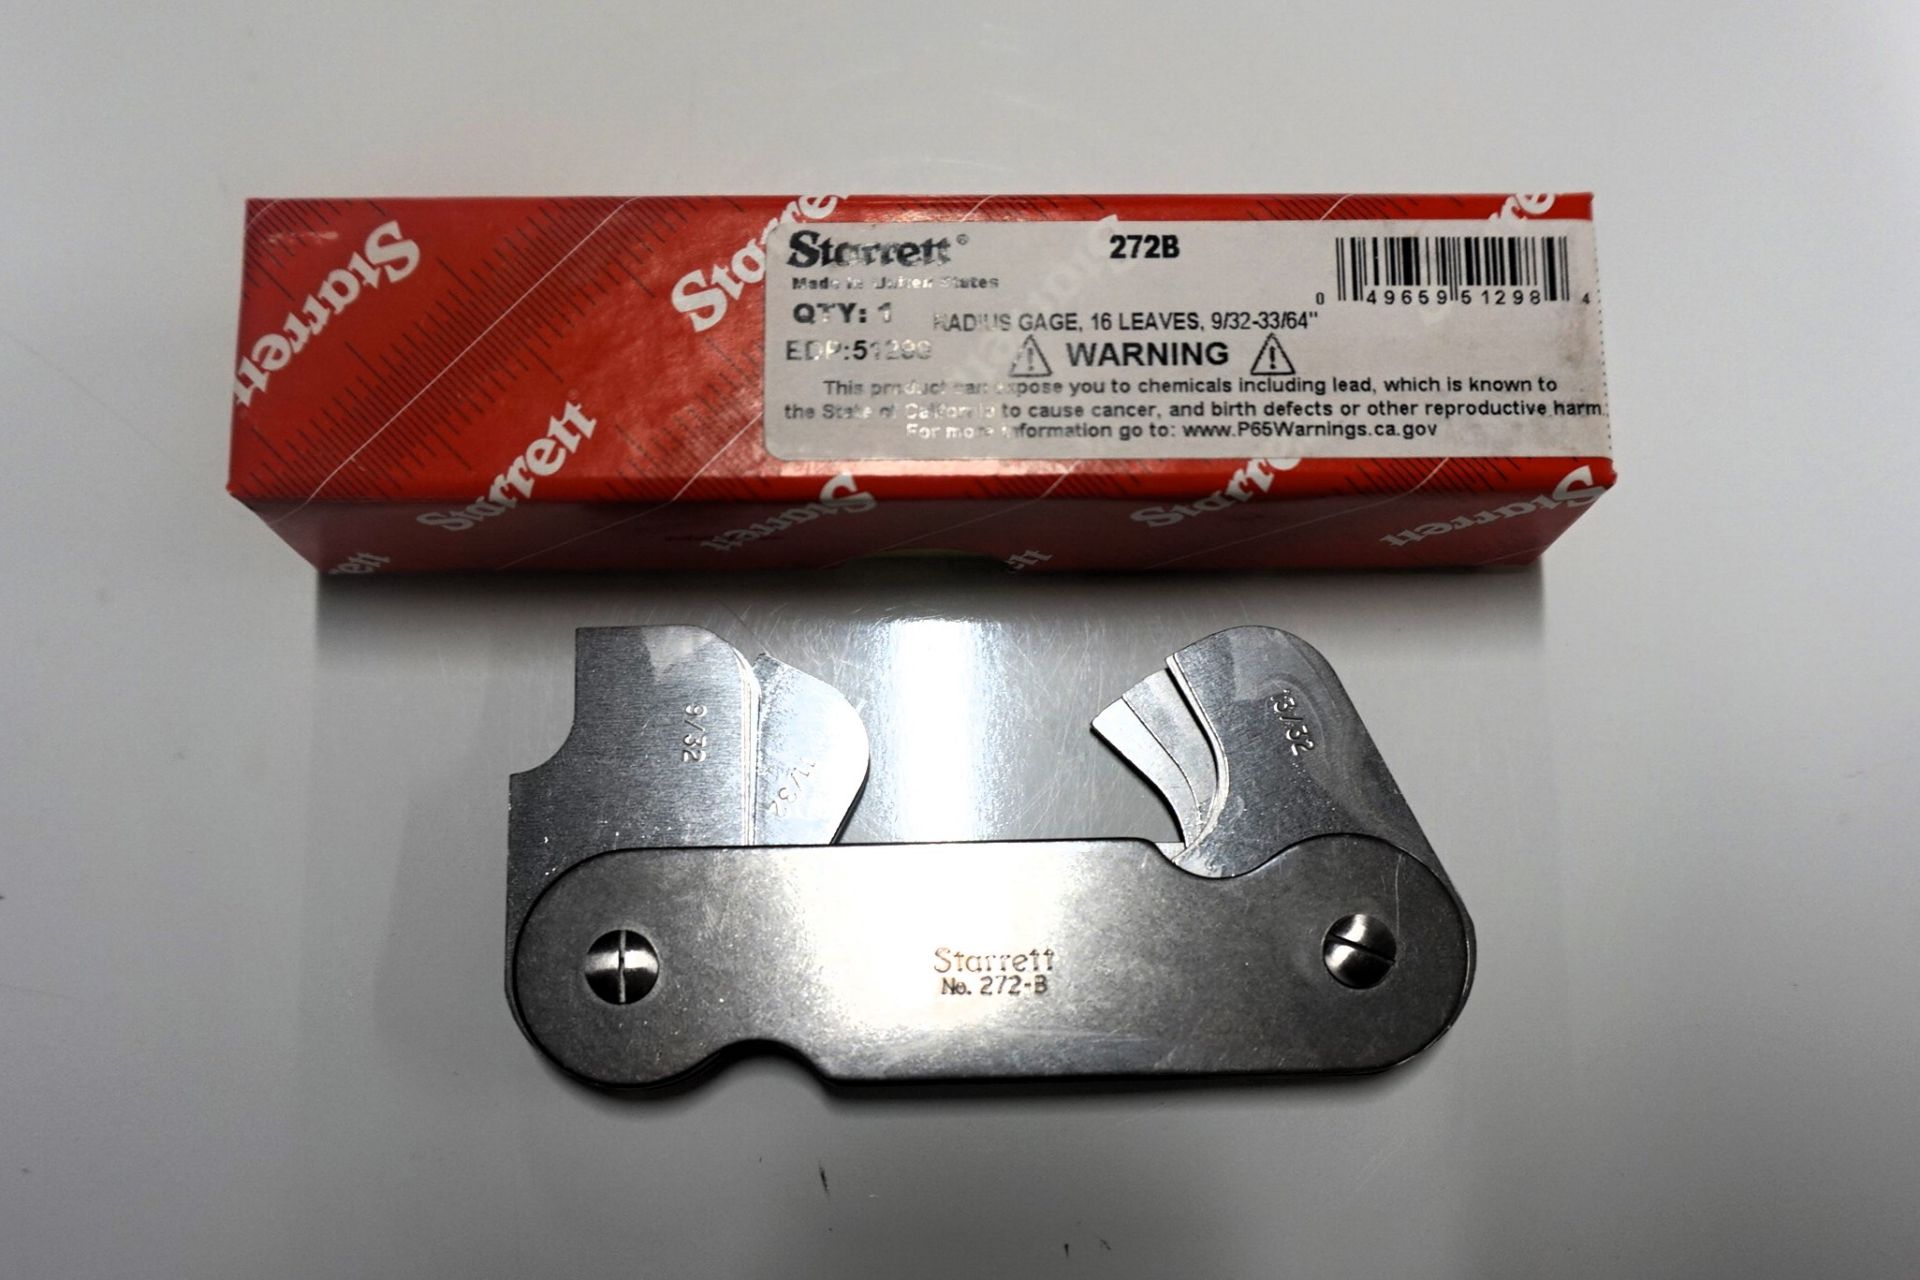 Model NO. 272B Fillet or Radius Gage. 9/32-33/64" Range (Concave and Convex). 64th Increments. 16 Le